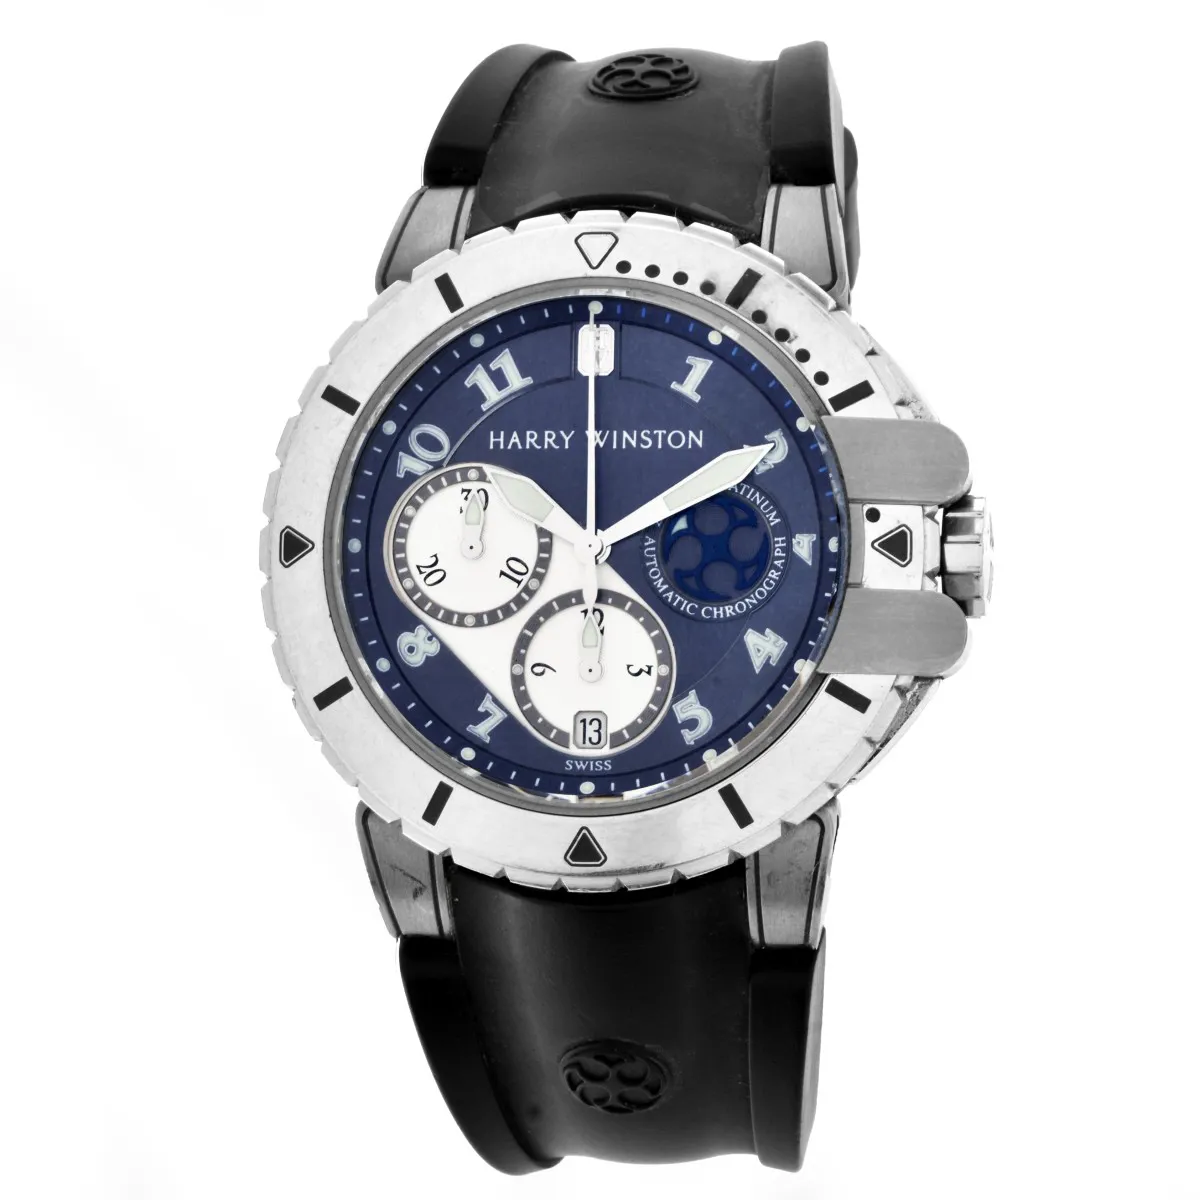 Harry Winston Project Z2 Ocean Diver Chronograph nullmm